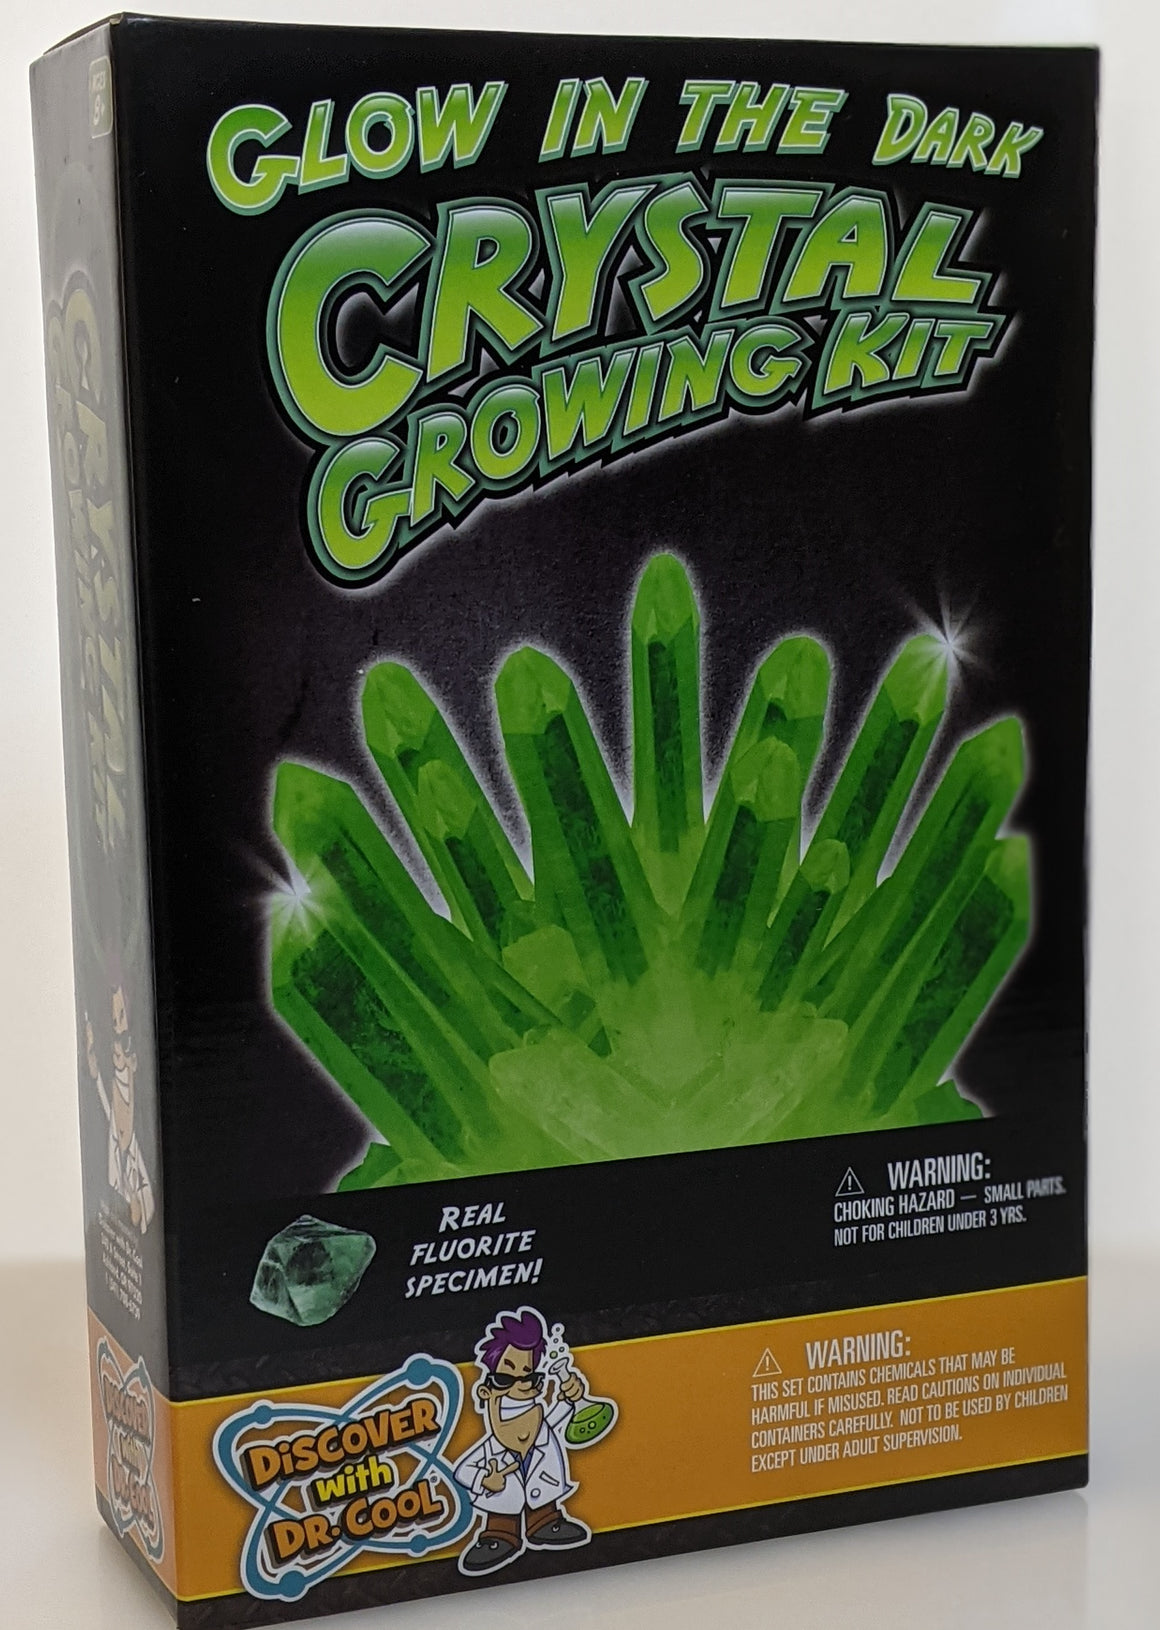  Glow  In The Dark  Crystal  Making  Kit Jurassic Quest Store 